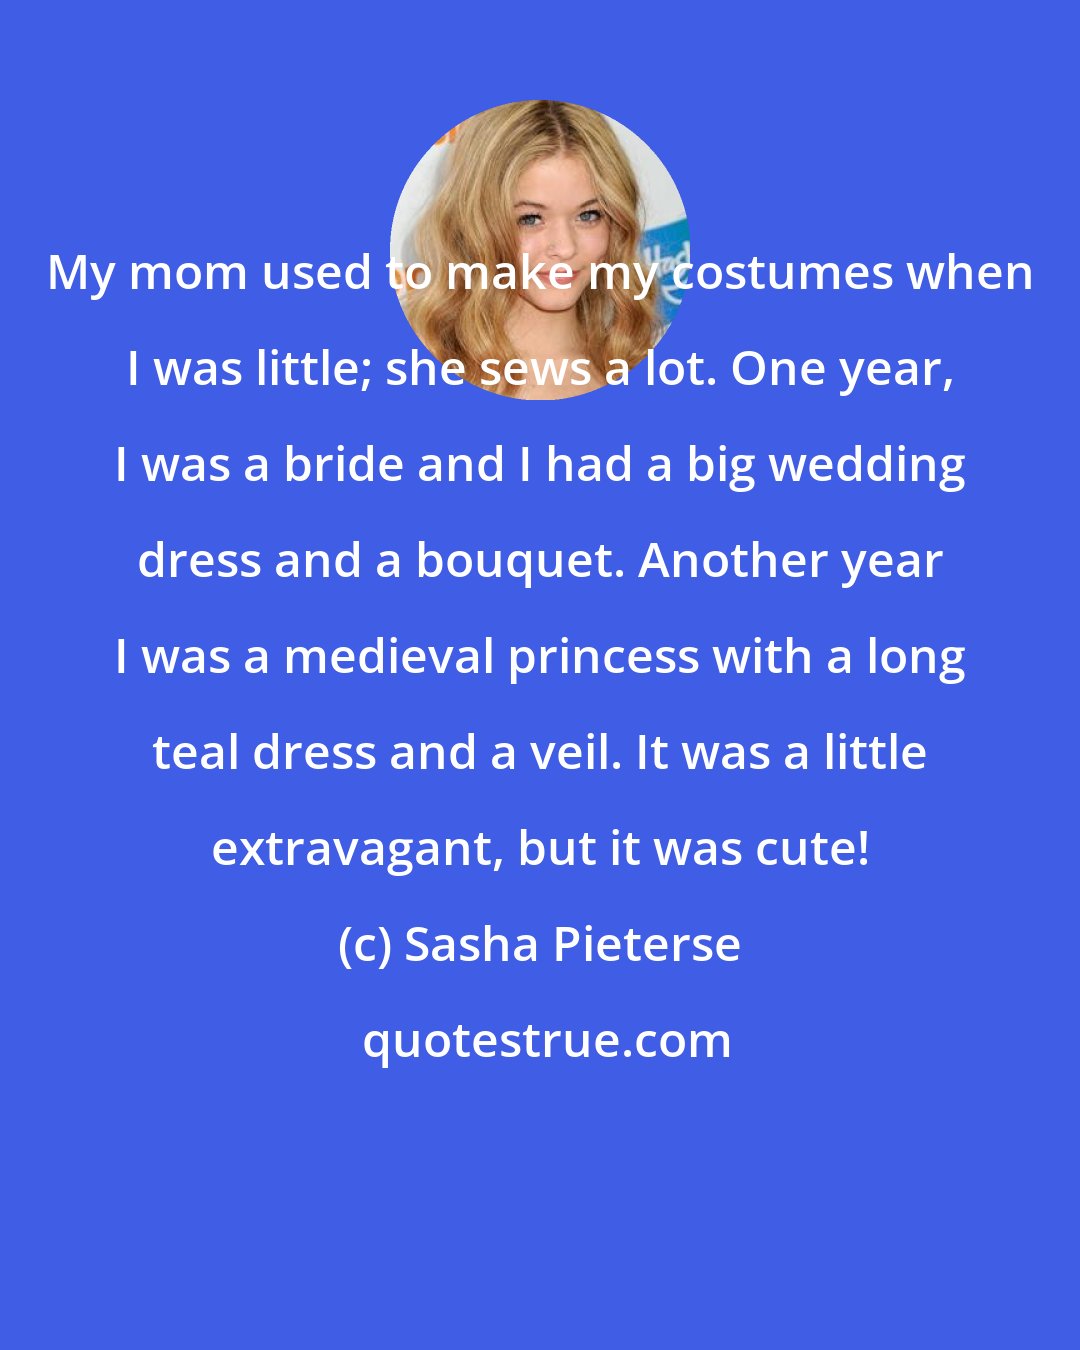 Sasha Pieterse: My mom used to make my costumes when I was little; she sews a lot. One year, I was a bride and I had a big wedding dress and a bouquet. Another year I was a medieval princess with a long teal dress and a veil. It was a little extravagant, but it was cute!